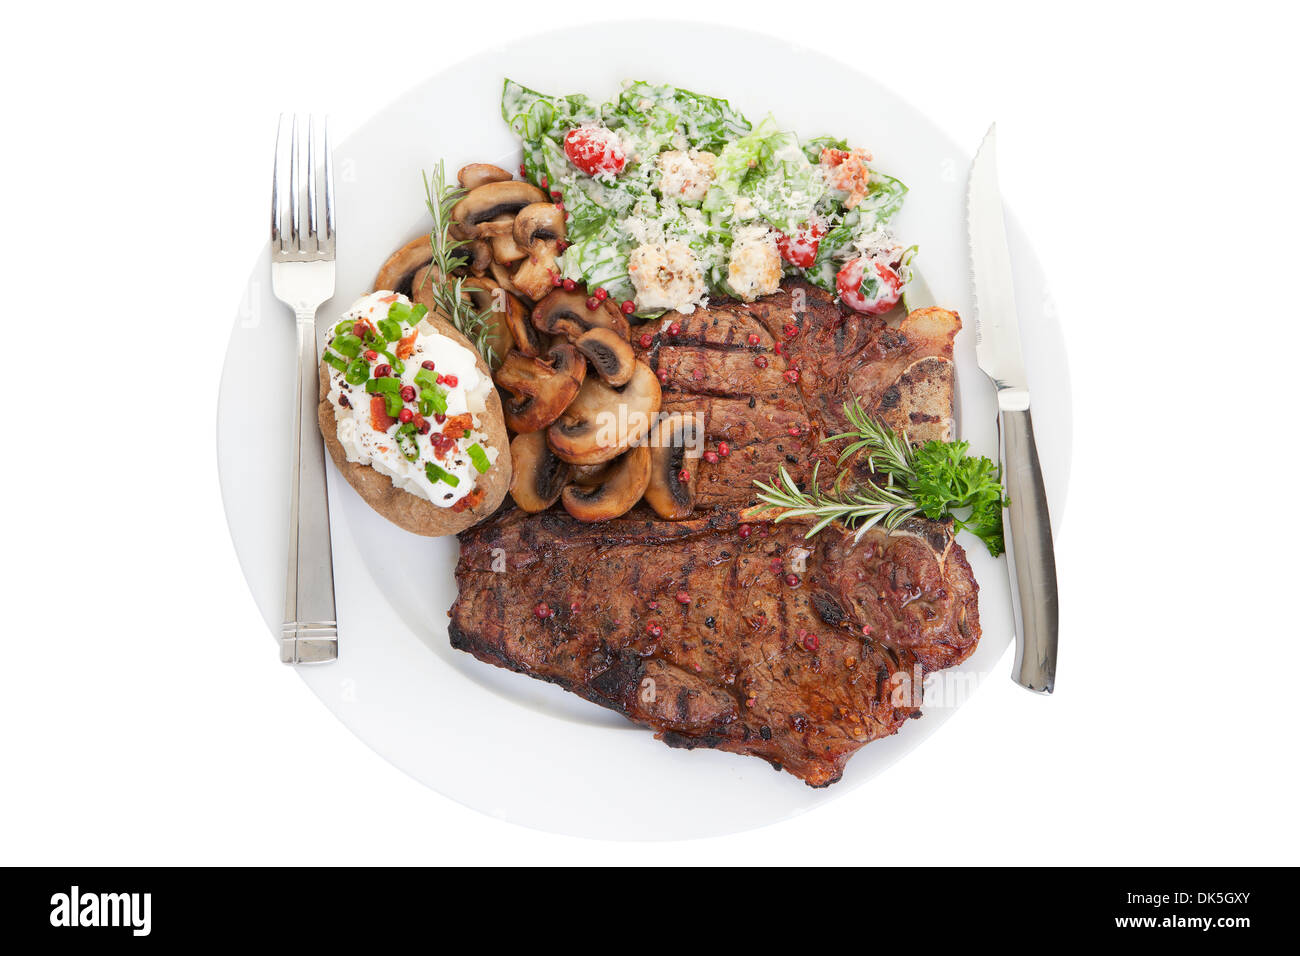 Grilled beef t bone steak dinner with Caesar salad, mushrooms and rosemary Stock Photo